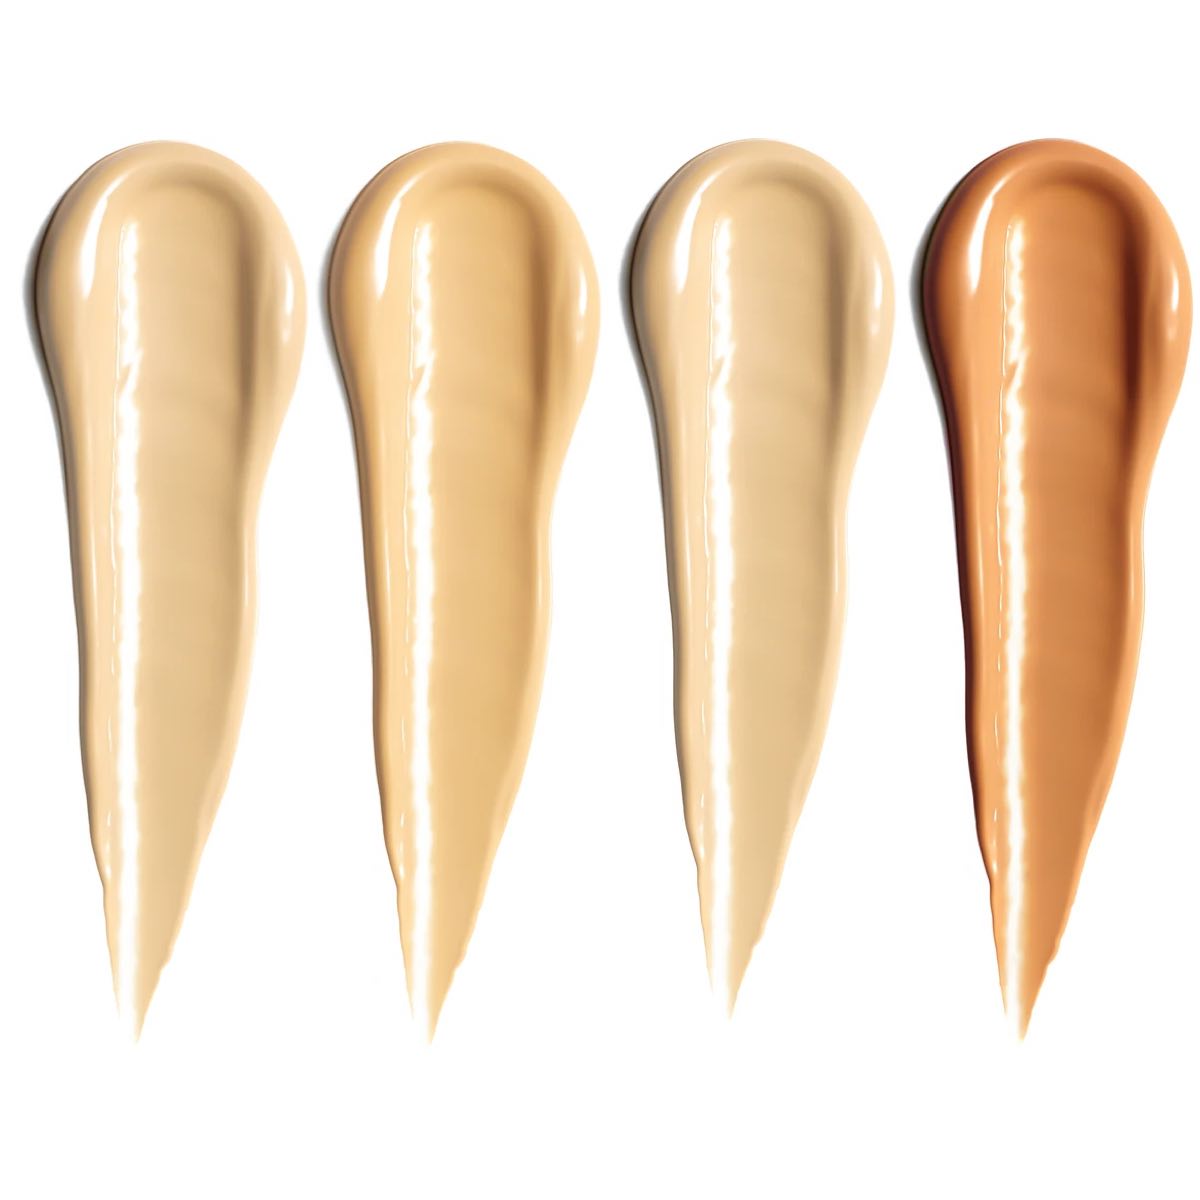 DELILAH Take Cover Radiant Cream Concealer Swatches